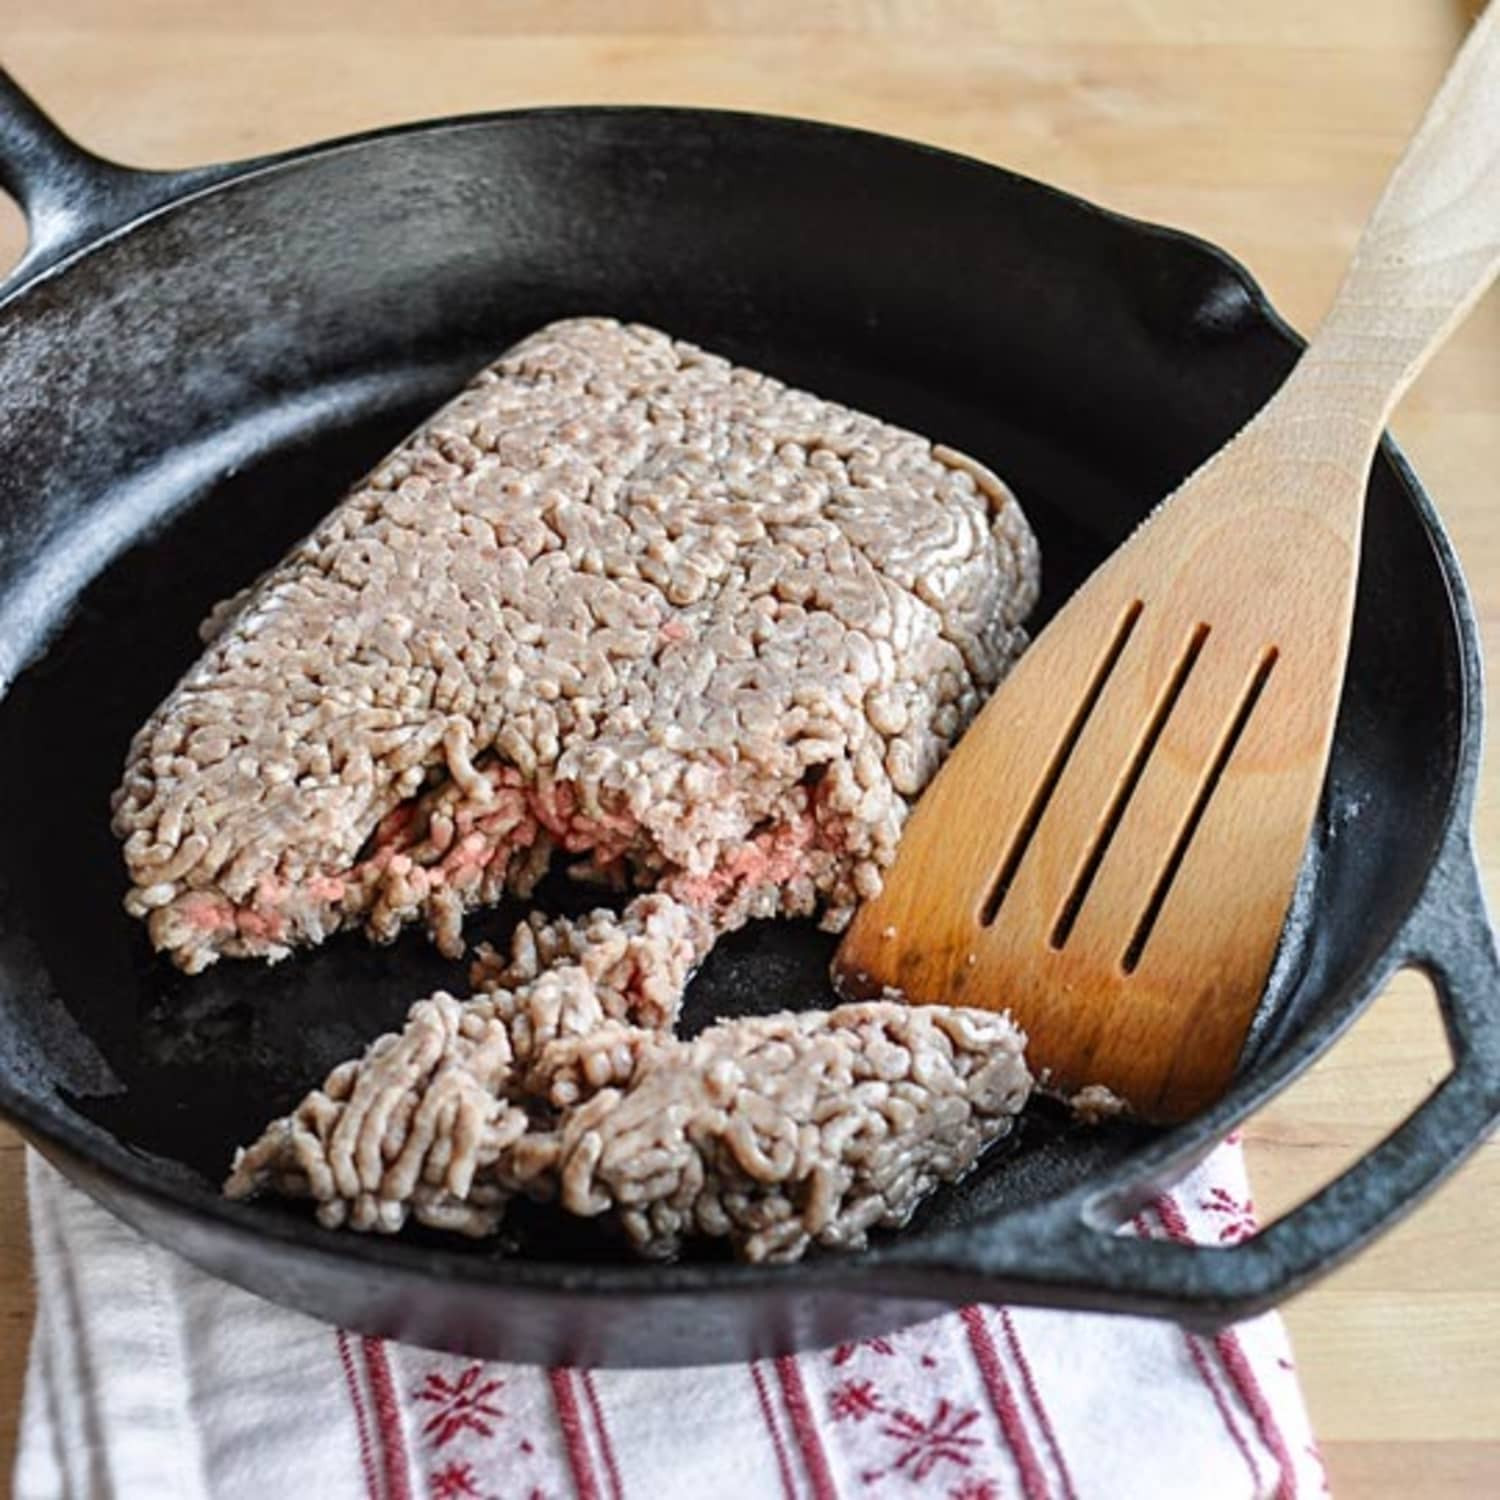 Bad Ground Beef Awesome if Meat Changes Color Has It Gone Bad